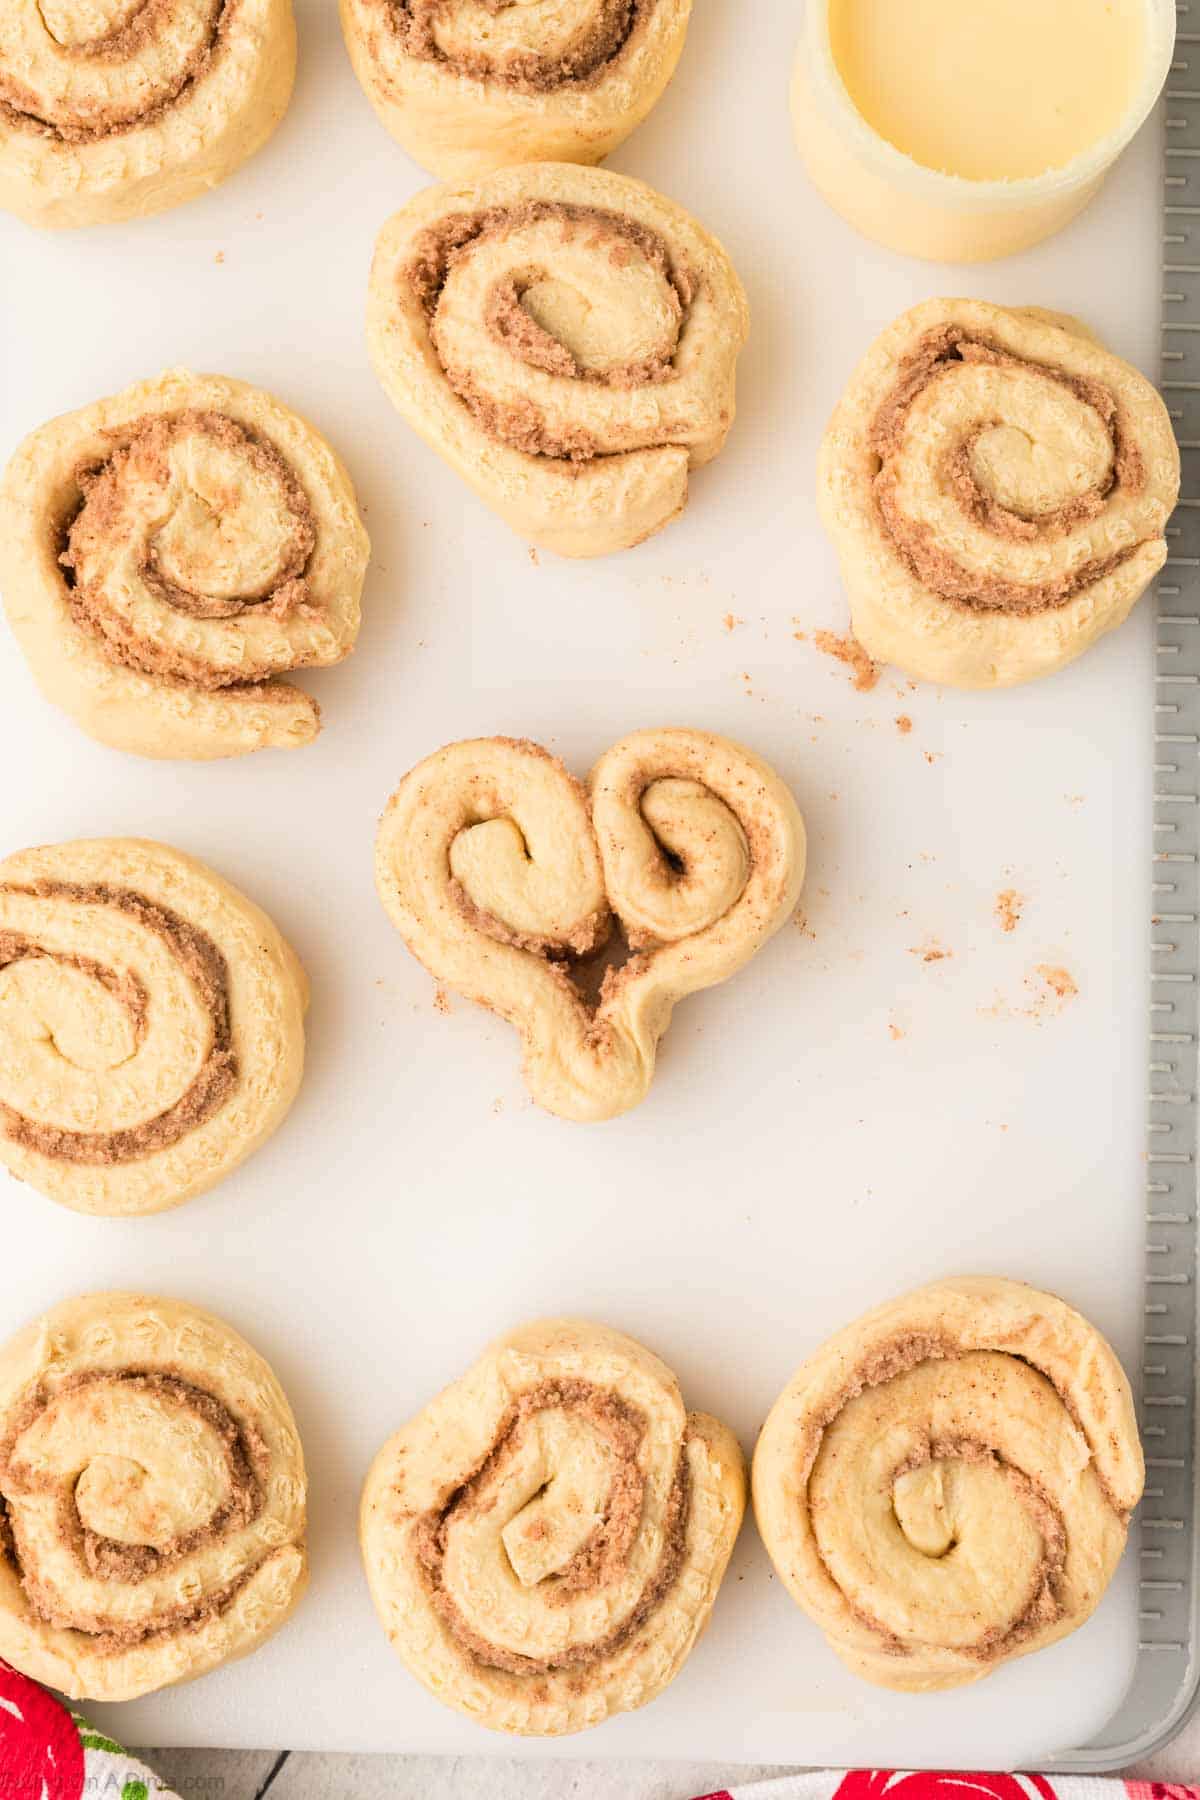 Shaping the cinnamon rolls into a heart